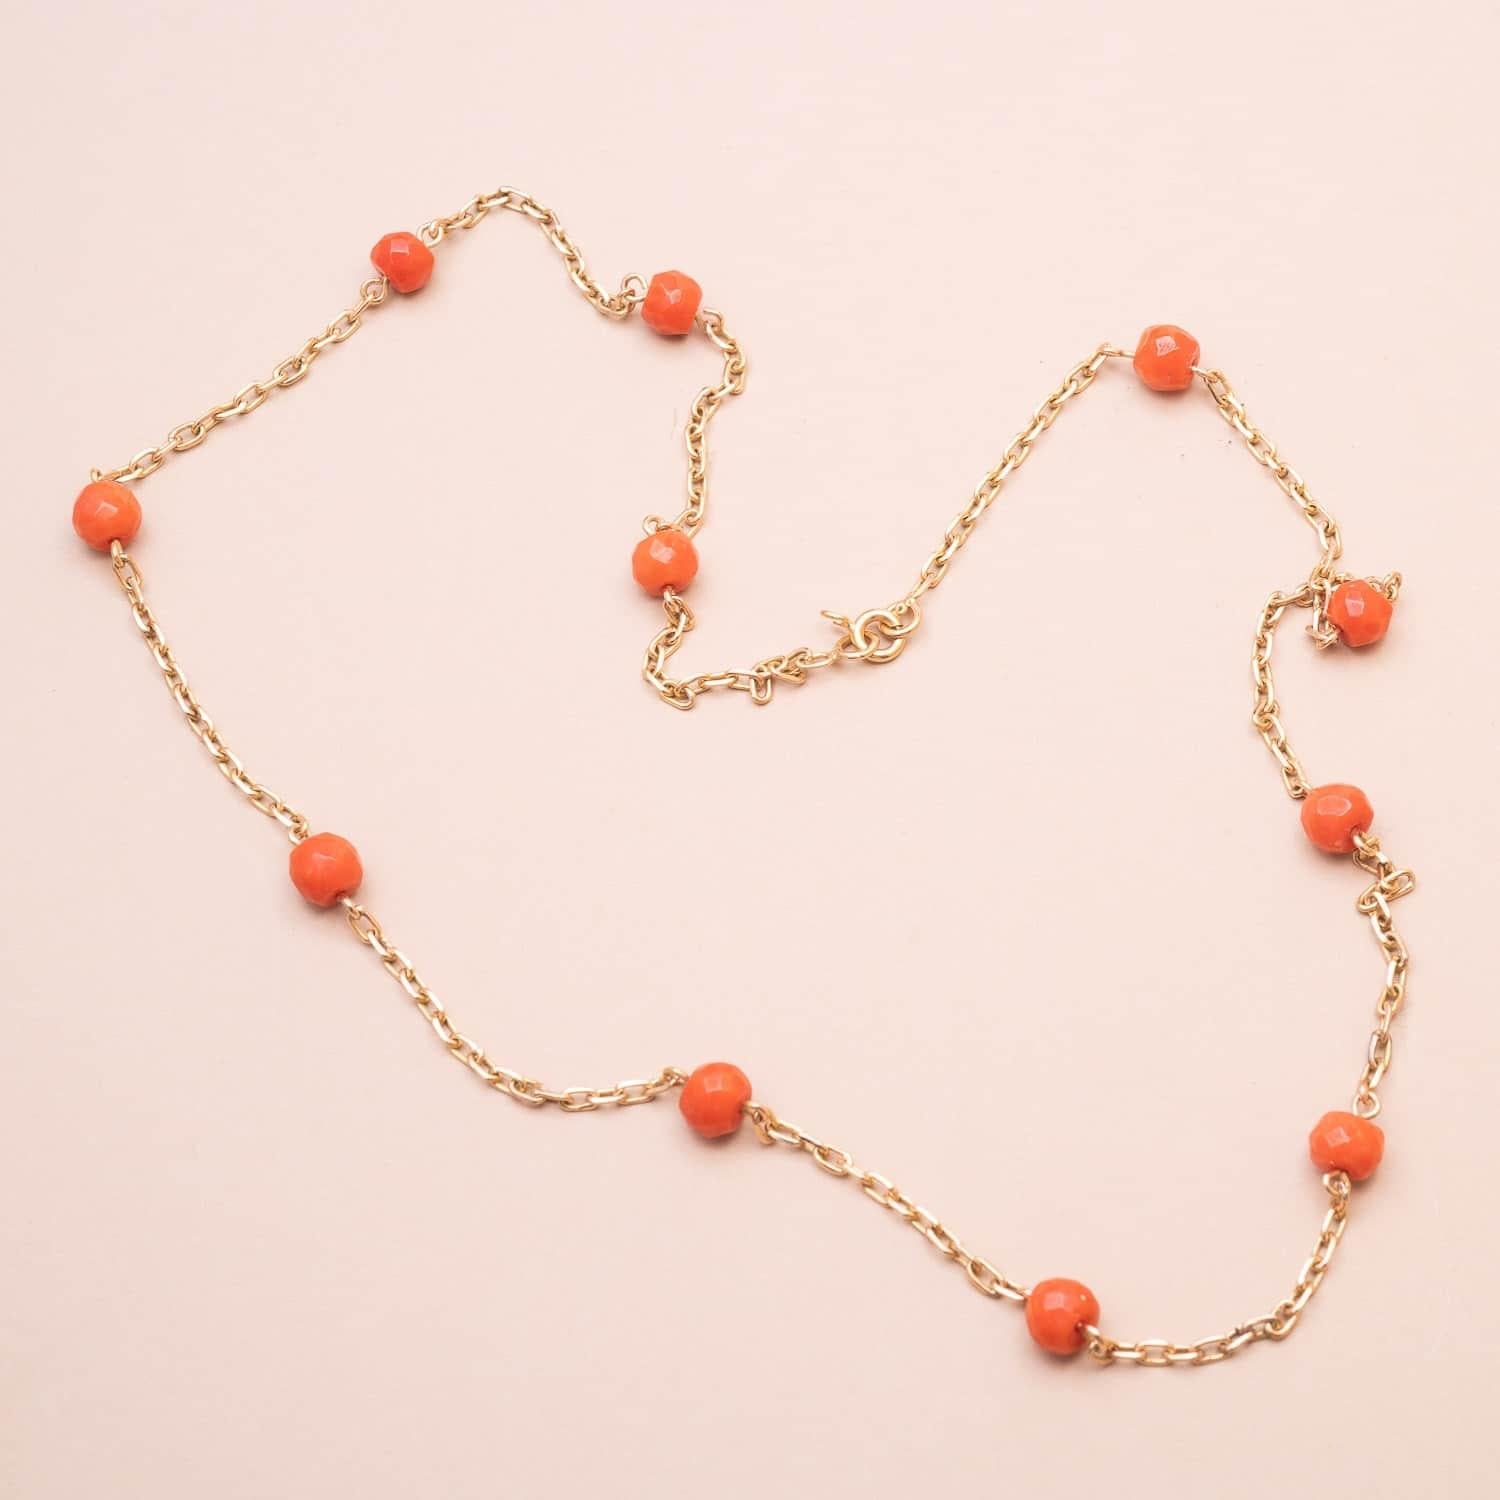 18K (750°/00) gold vintage sautoir necklace adorned by Mediterranean red coral beads each separated by a trace filed chain. 

Italian craftsmanship from the seventies 

Round clasp 

Length : 61.5cm 

Coral beads diameter : 7.7mm

Gross weight :